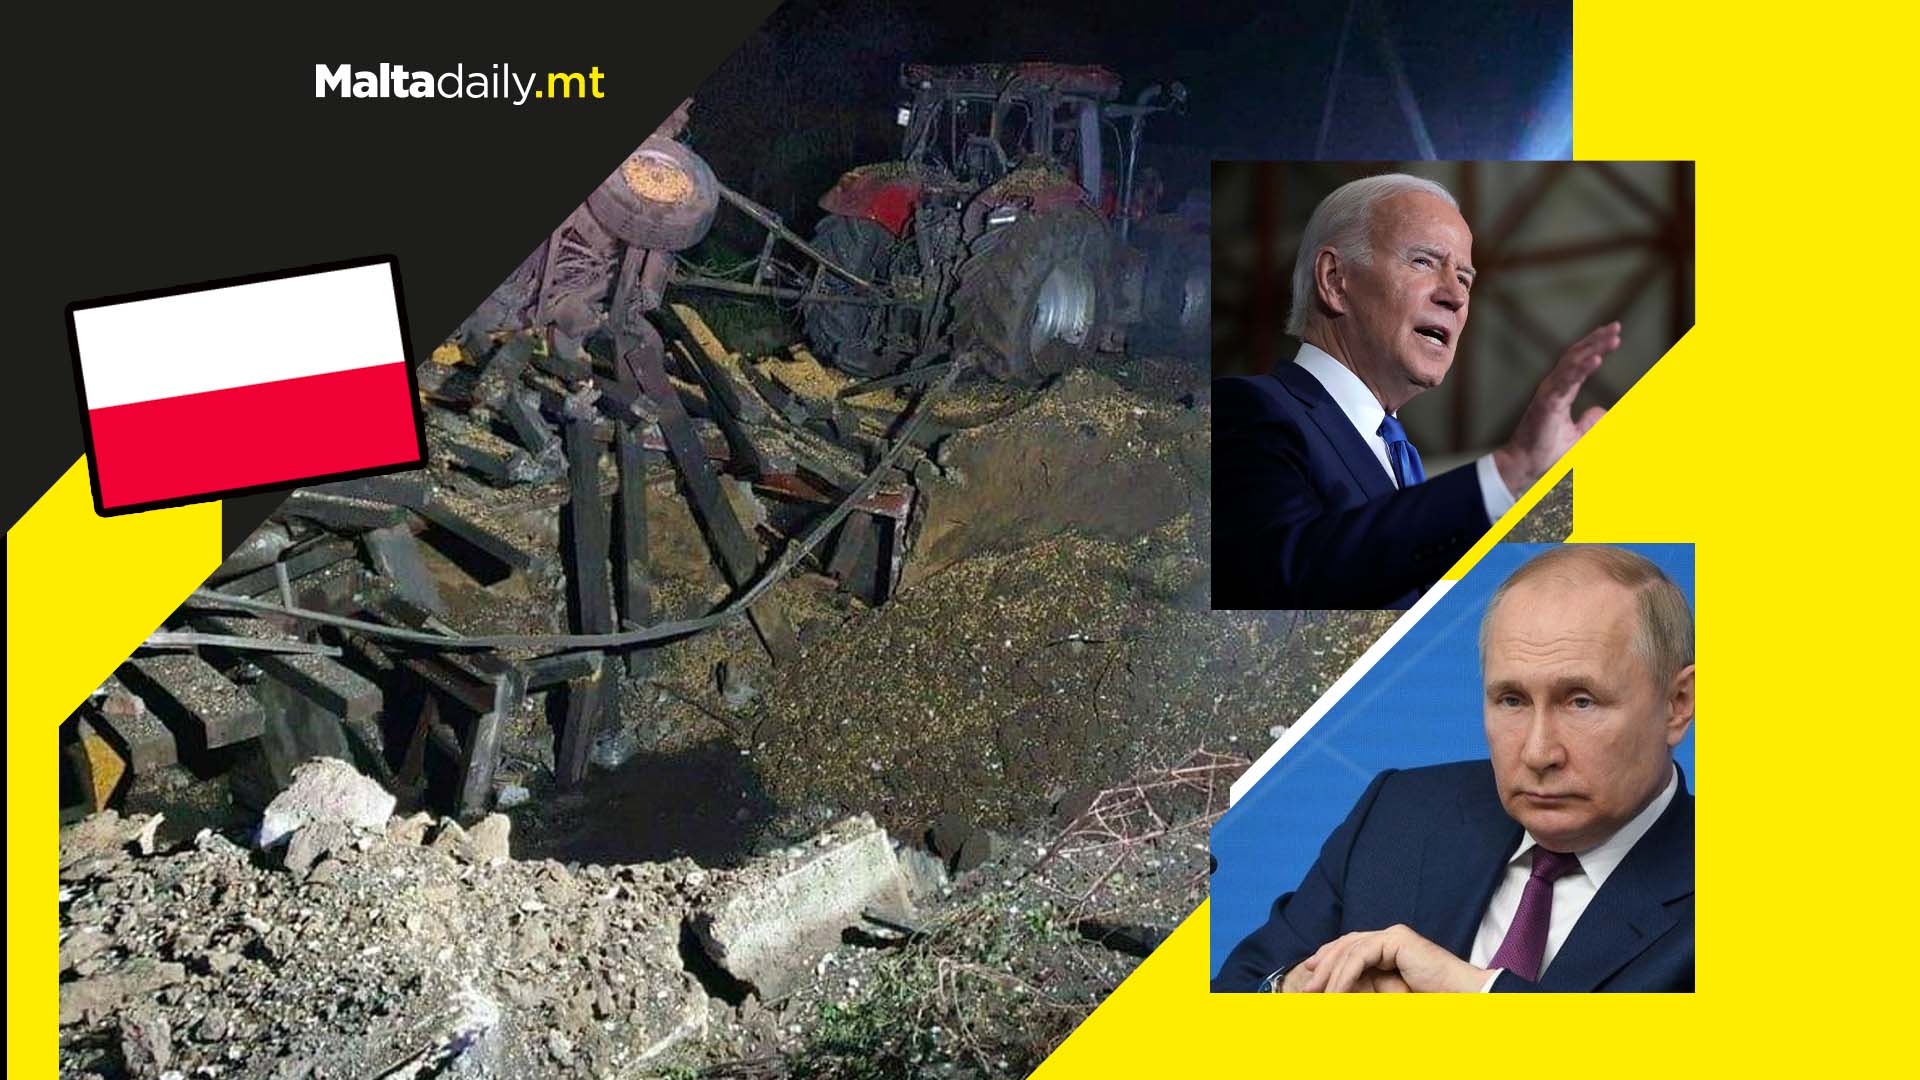 Missile that hit Poland might not have been fired from Russia, Biden suggests